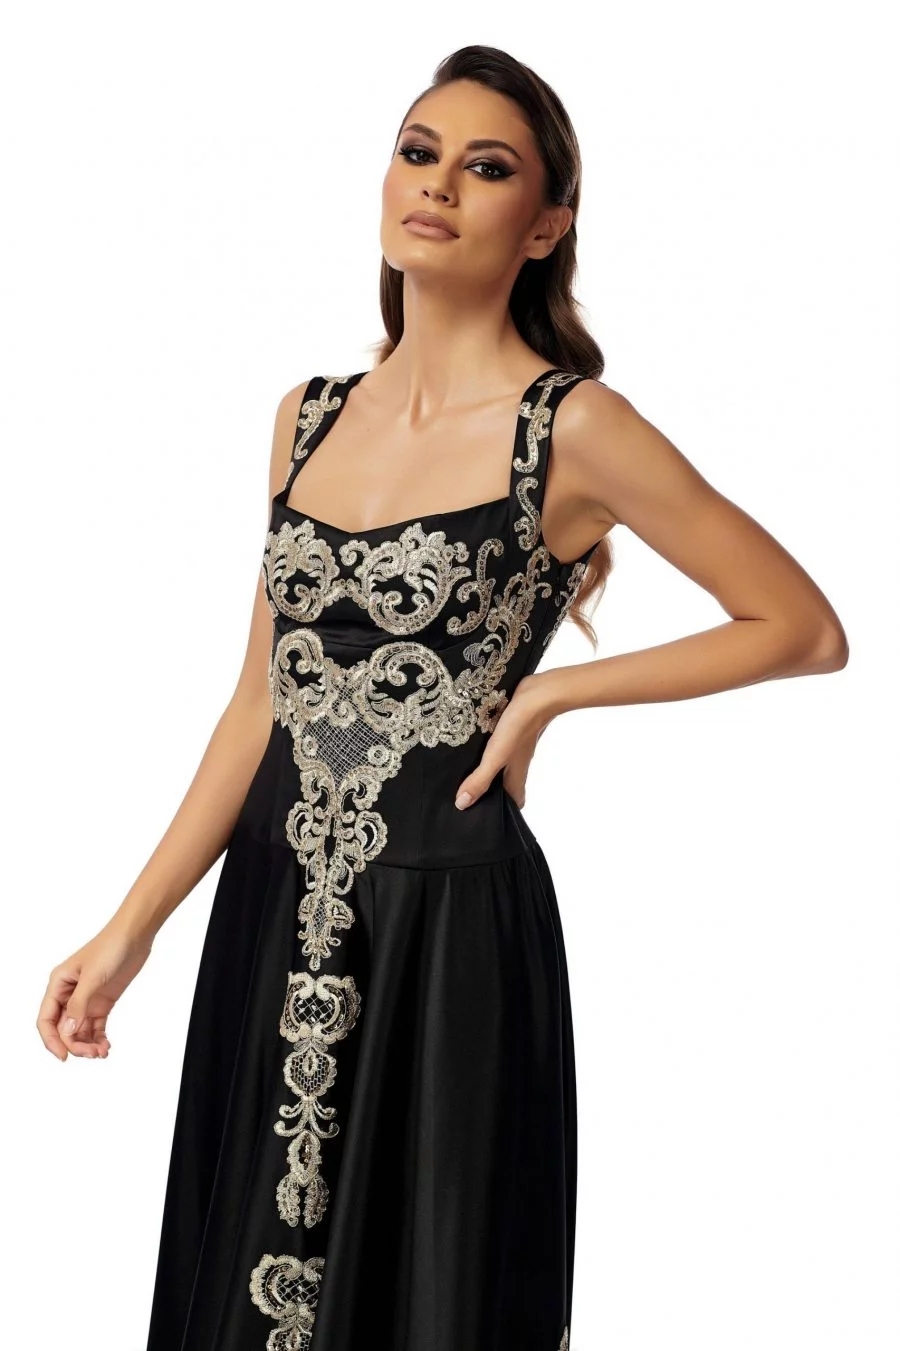 Black Evening Dress with Gold Embroidery BY PassionByD